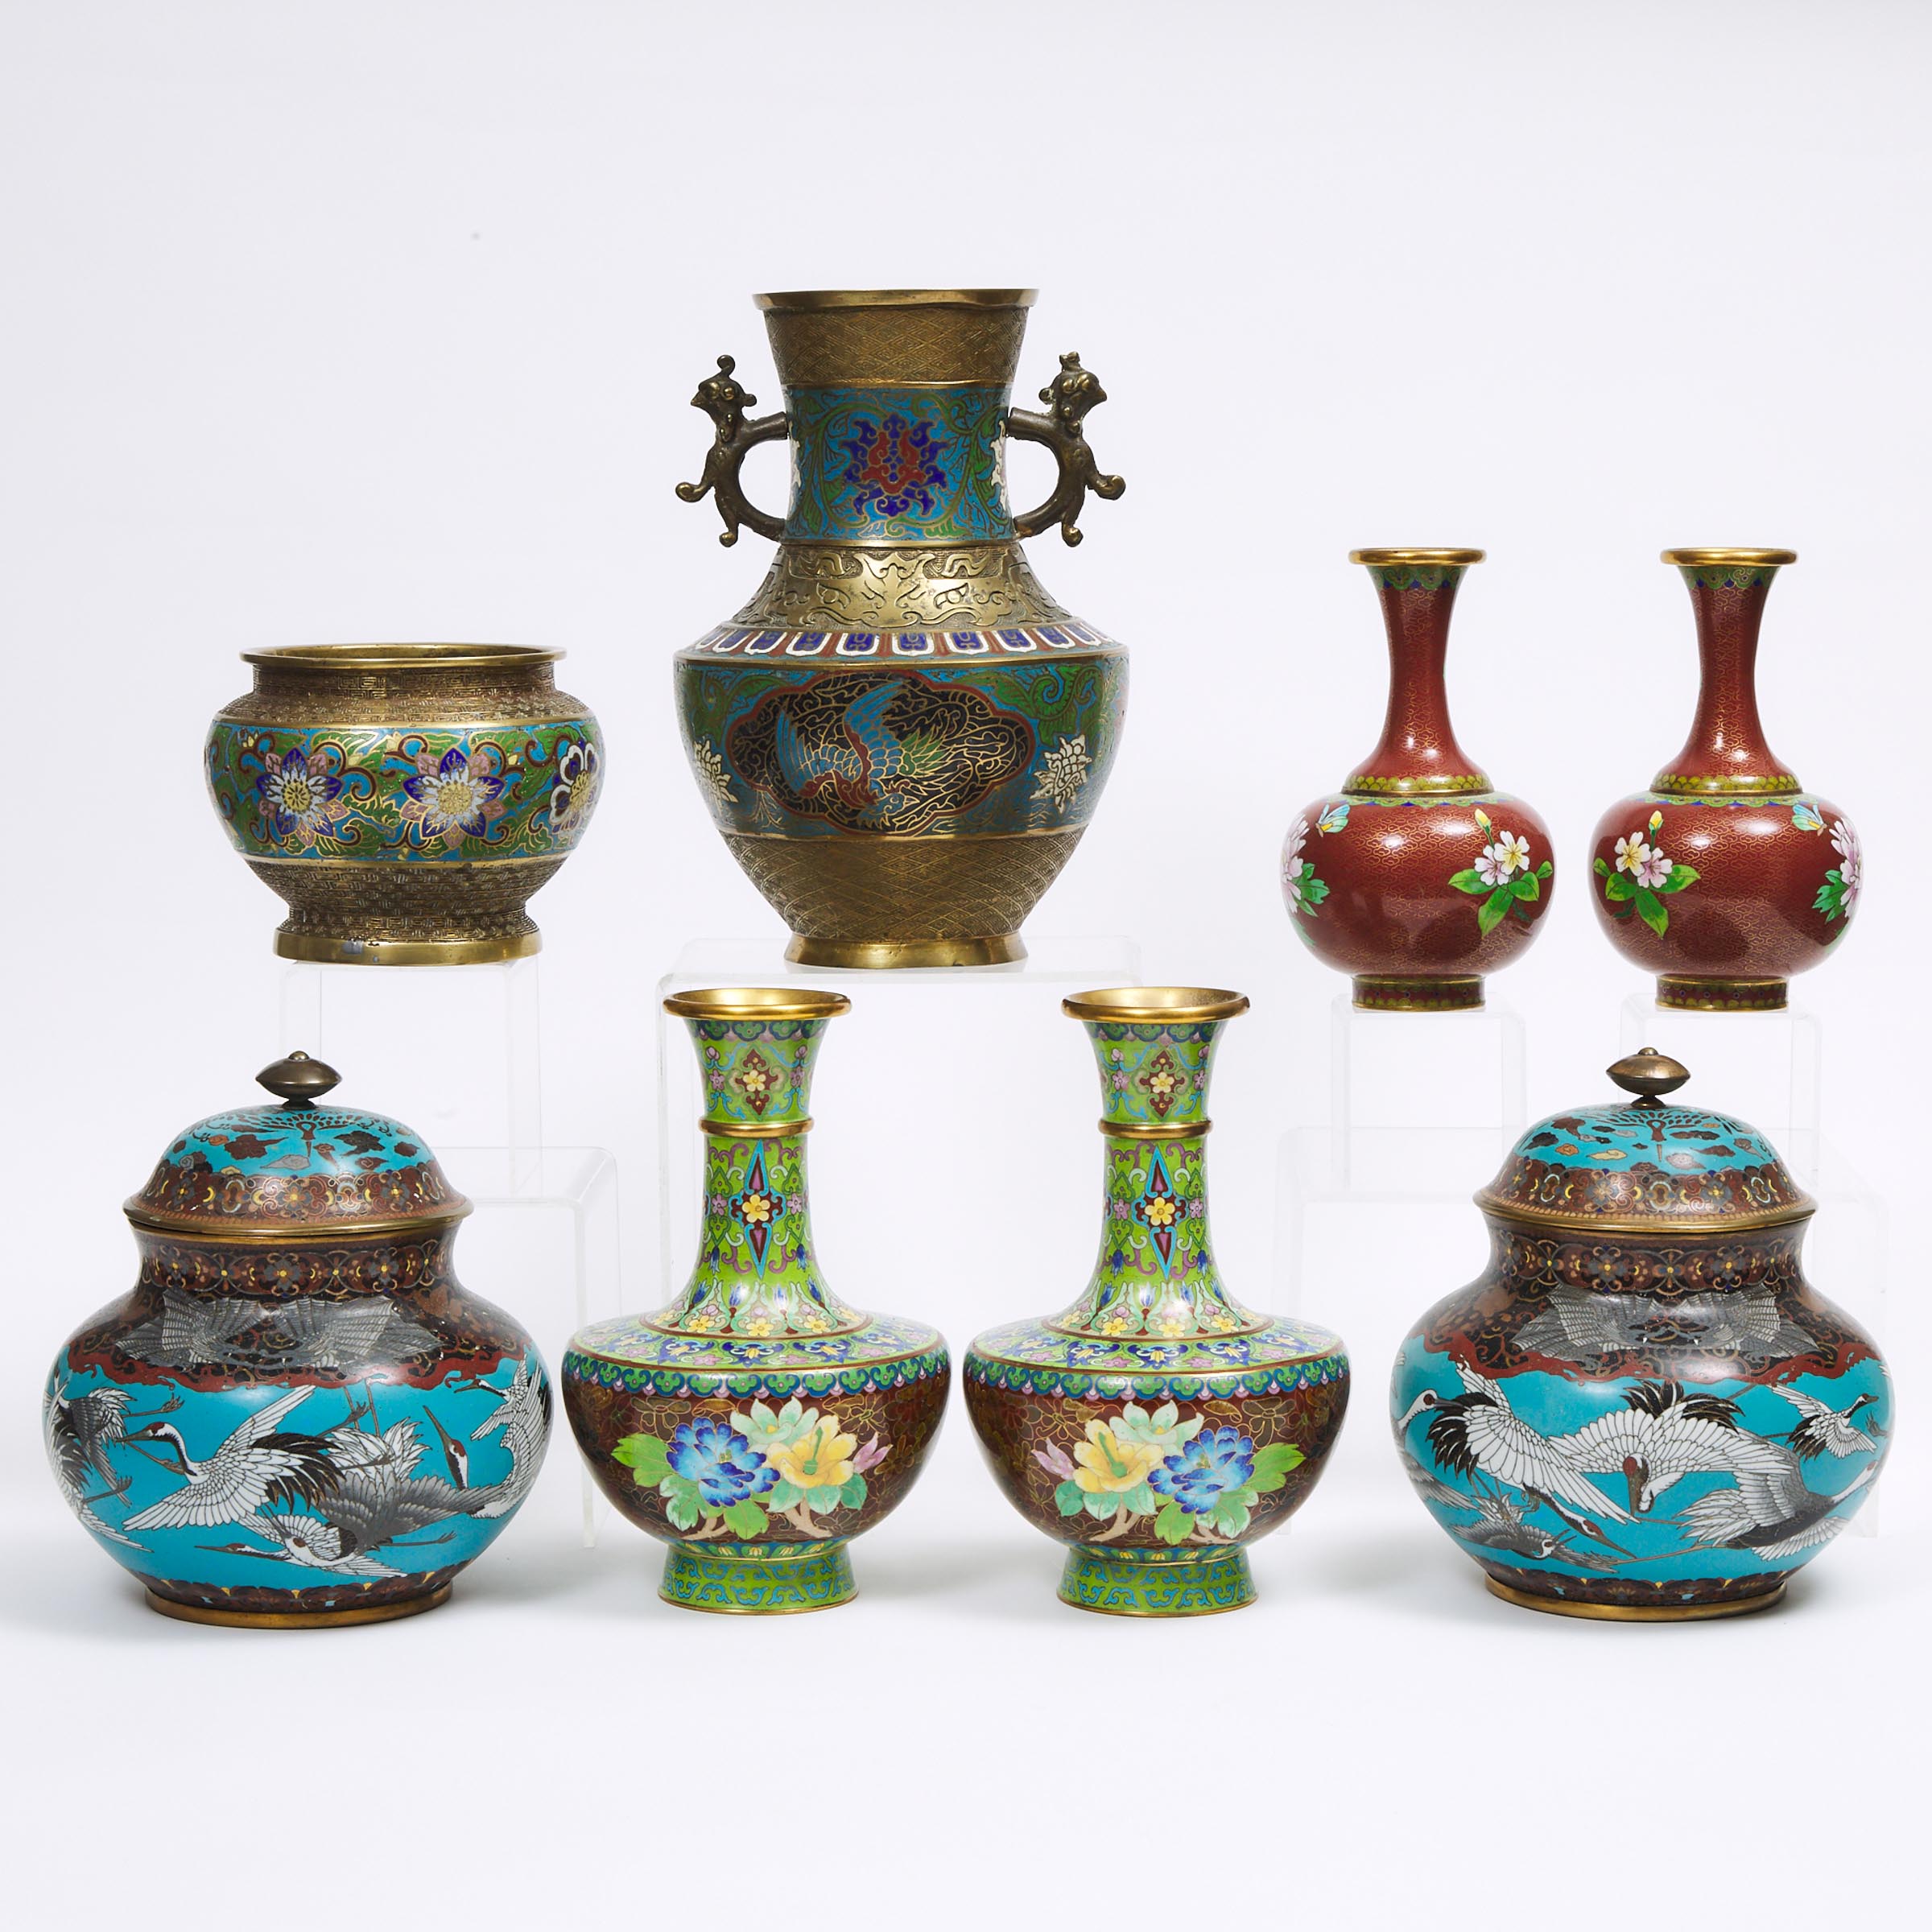 A Group of Eight Cloisonné Vessels